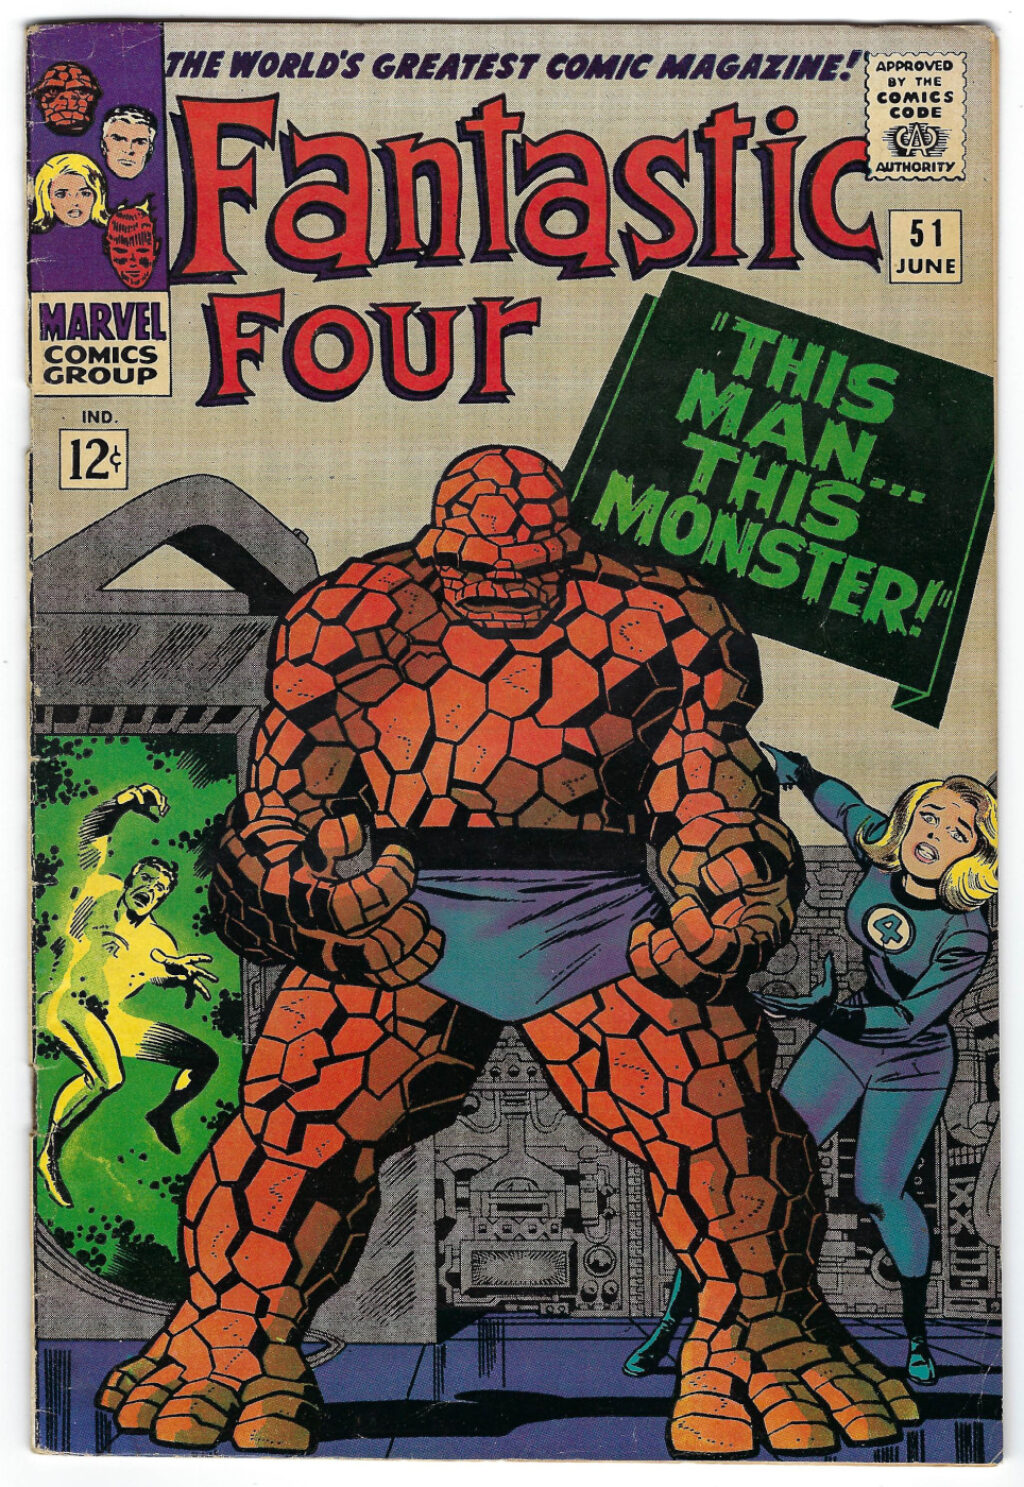 Marvel Comics Fantastic Four (1961) #51: Iconic "This Man... This Monster" Cover 1